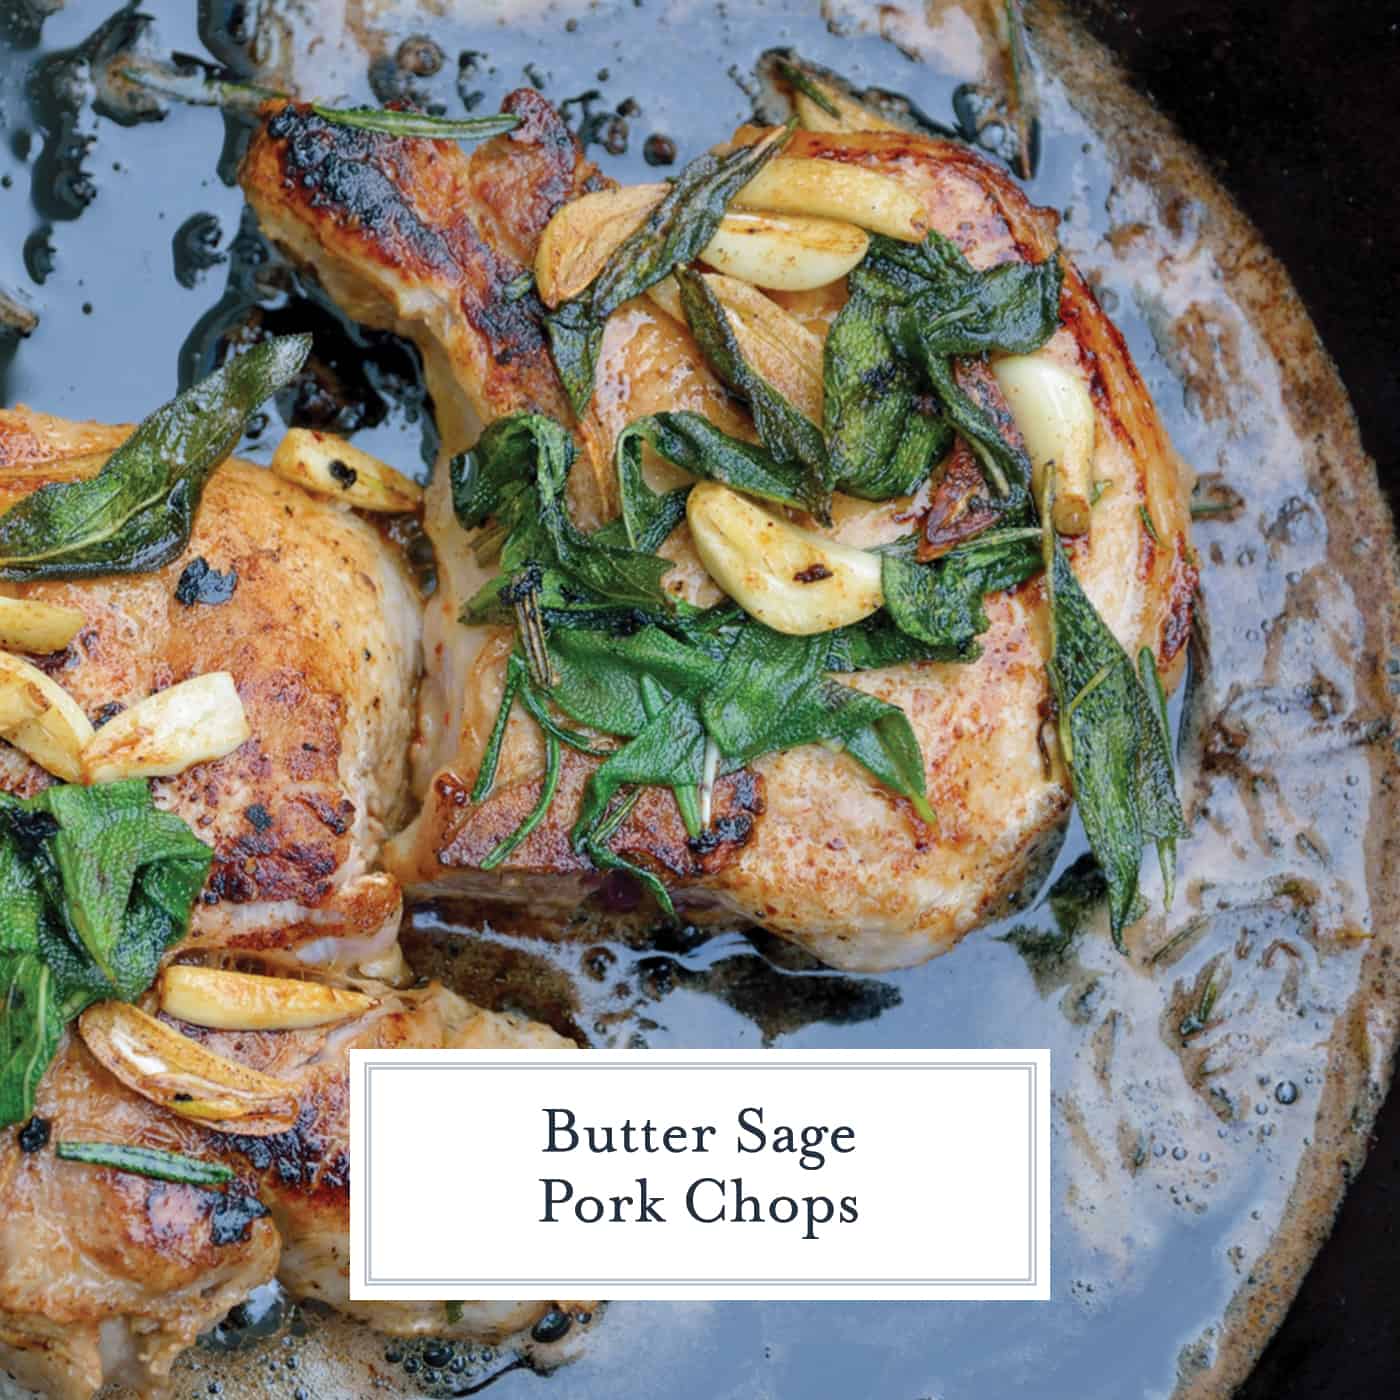 Butter Sage Pork Chops are pan seared pork chops in a simple butter, garlic and sage sauce. Sear in cast iron and then finish in the oven for the best pork chop recipe ever! #porkchoprecipe #pansearedporkchops www.savoryexperiments.com 